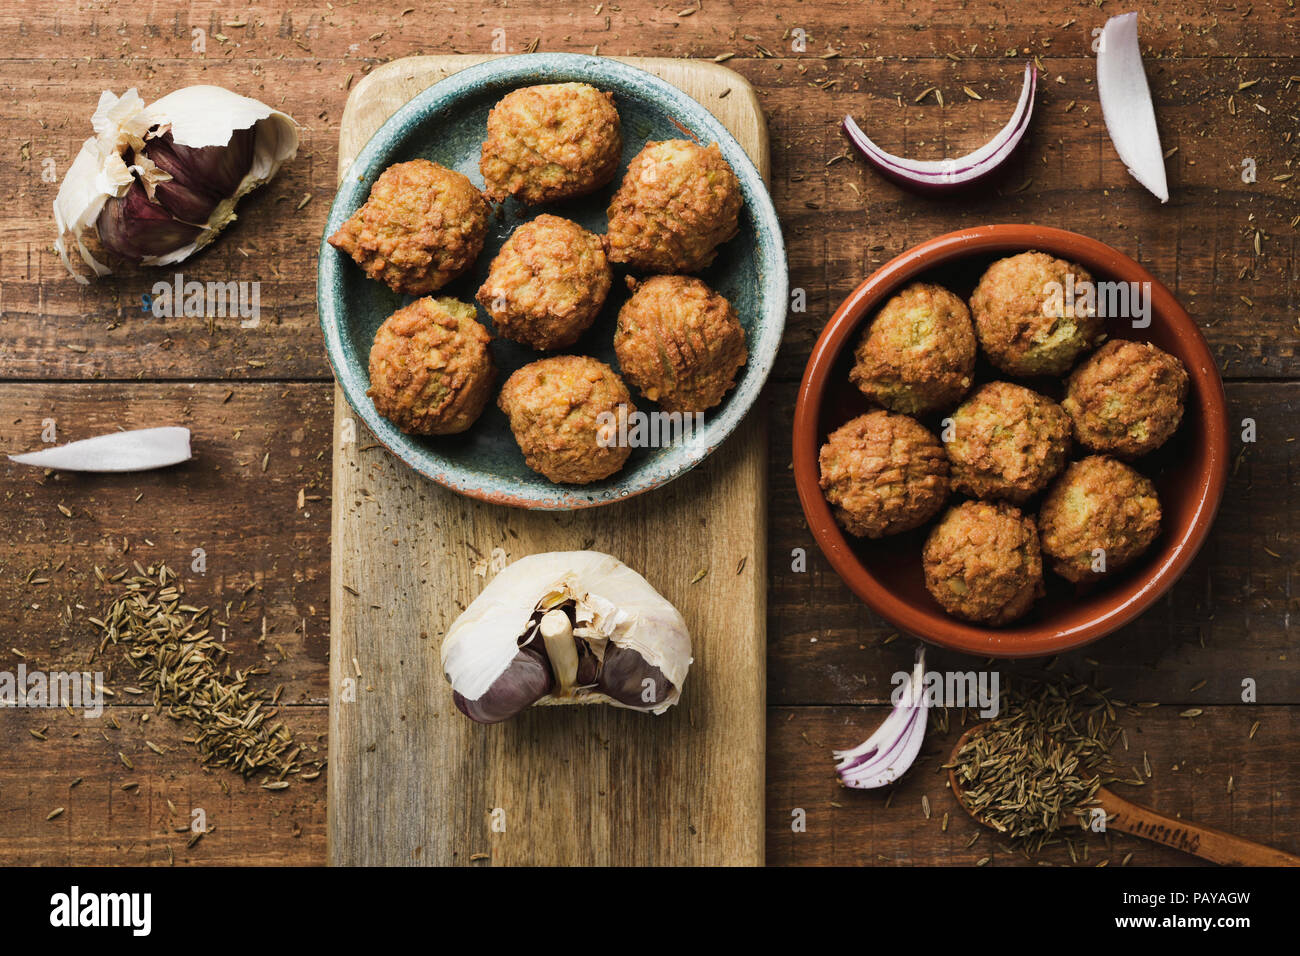 high angle view of some falafel served in two different earthenware plates placed on a rustic wooden table Stock Photo